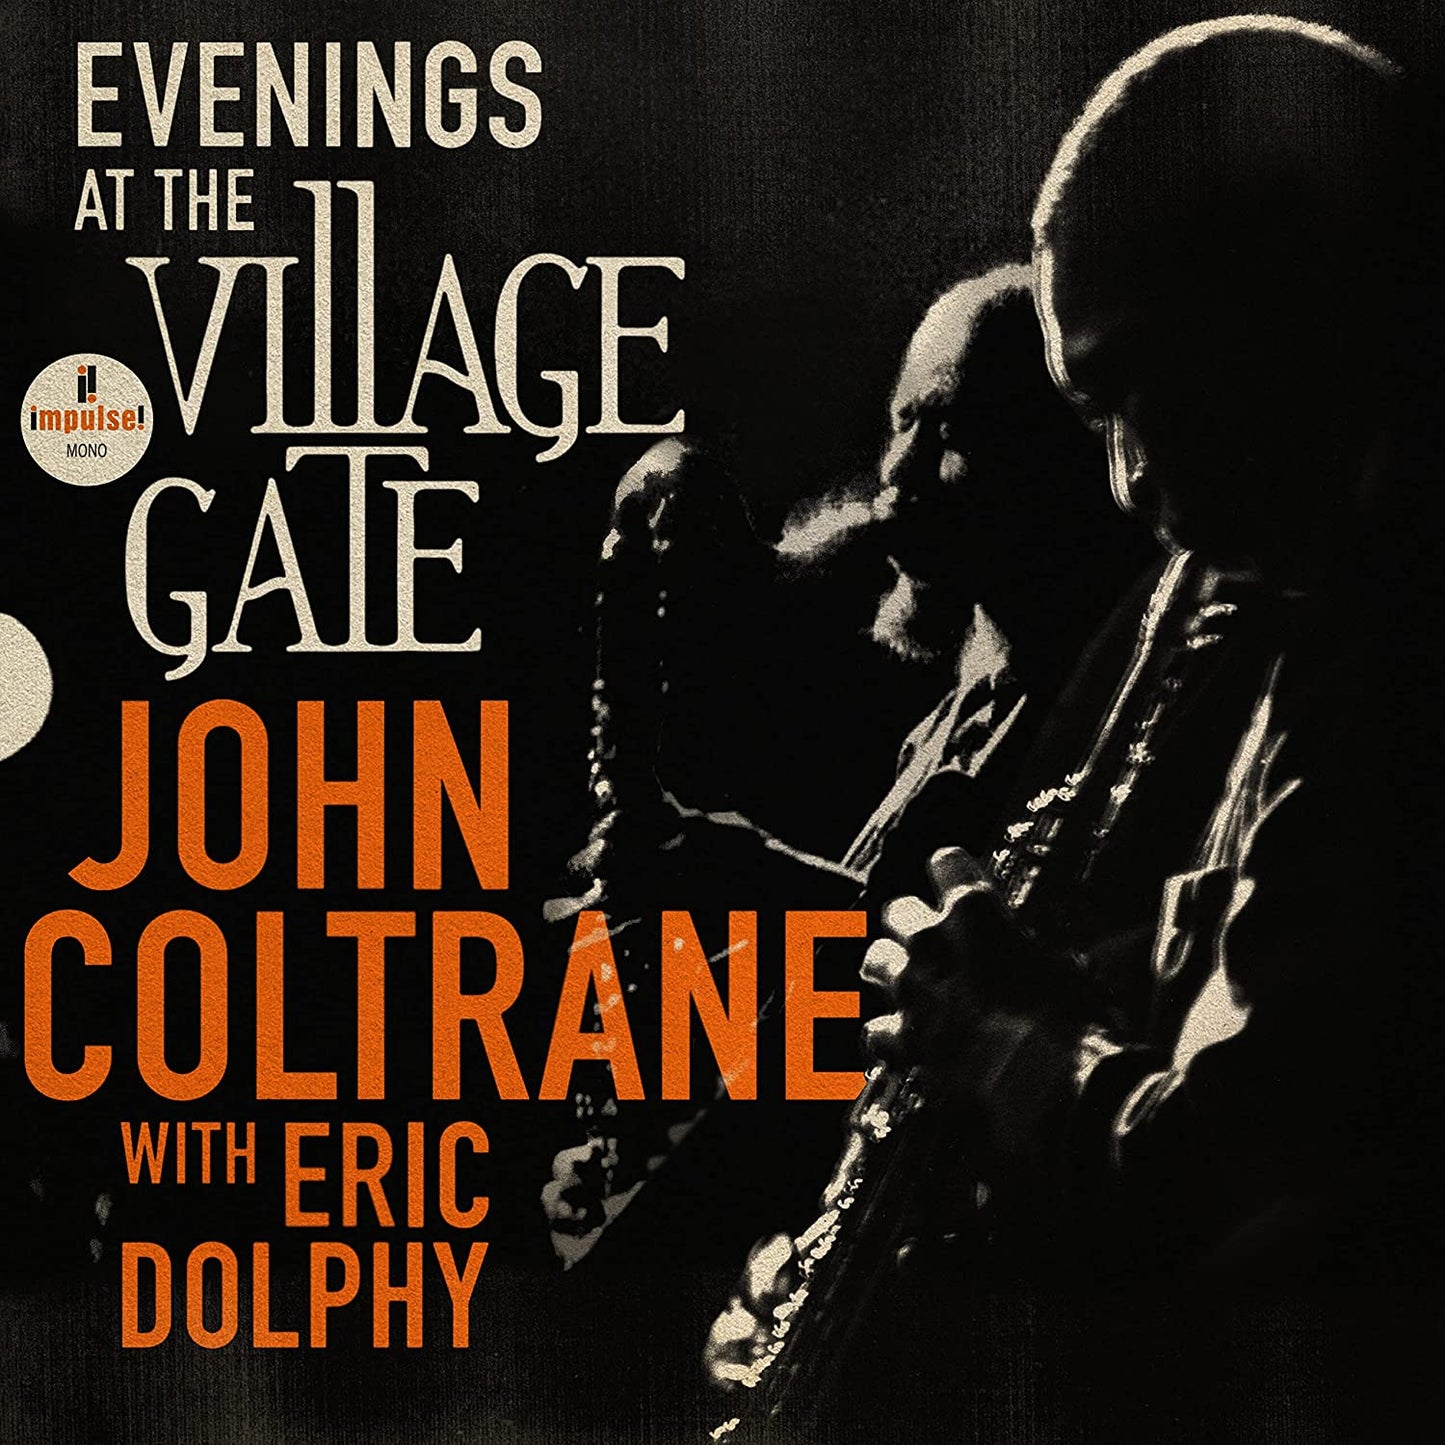 John Coltrane with Eric Dolphy Evenings At The Village Gate